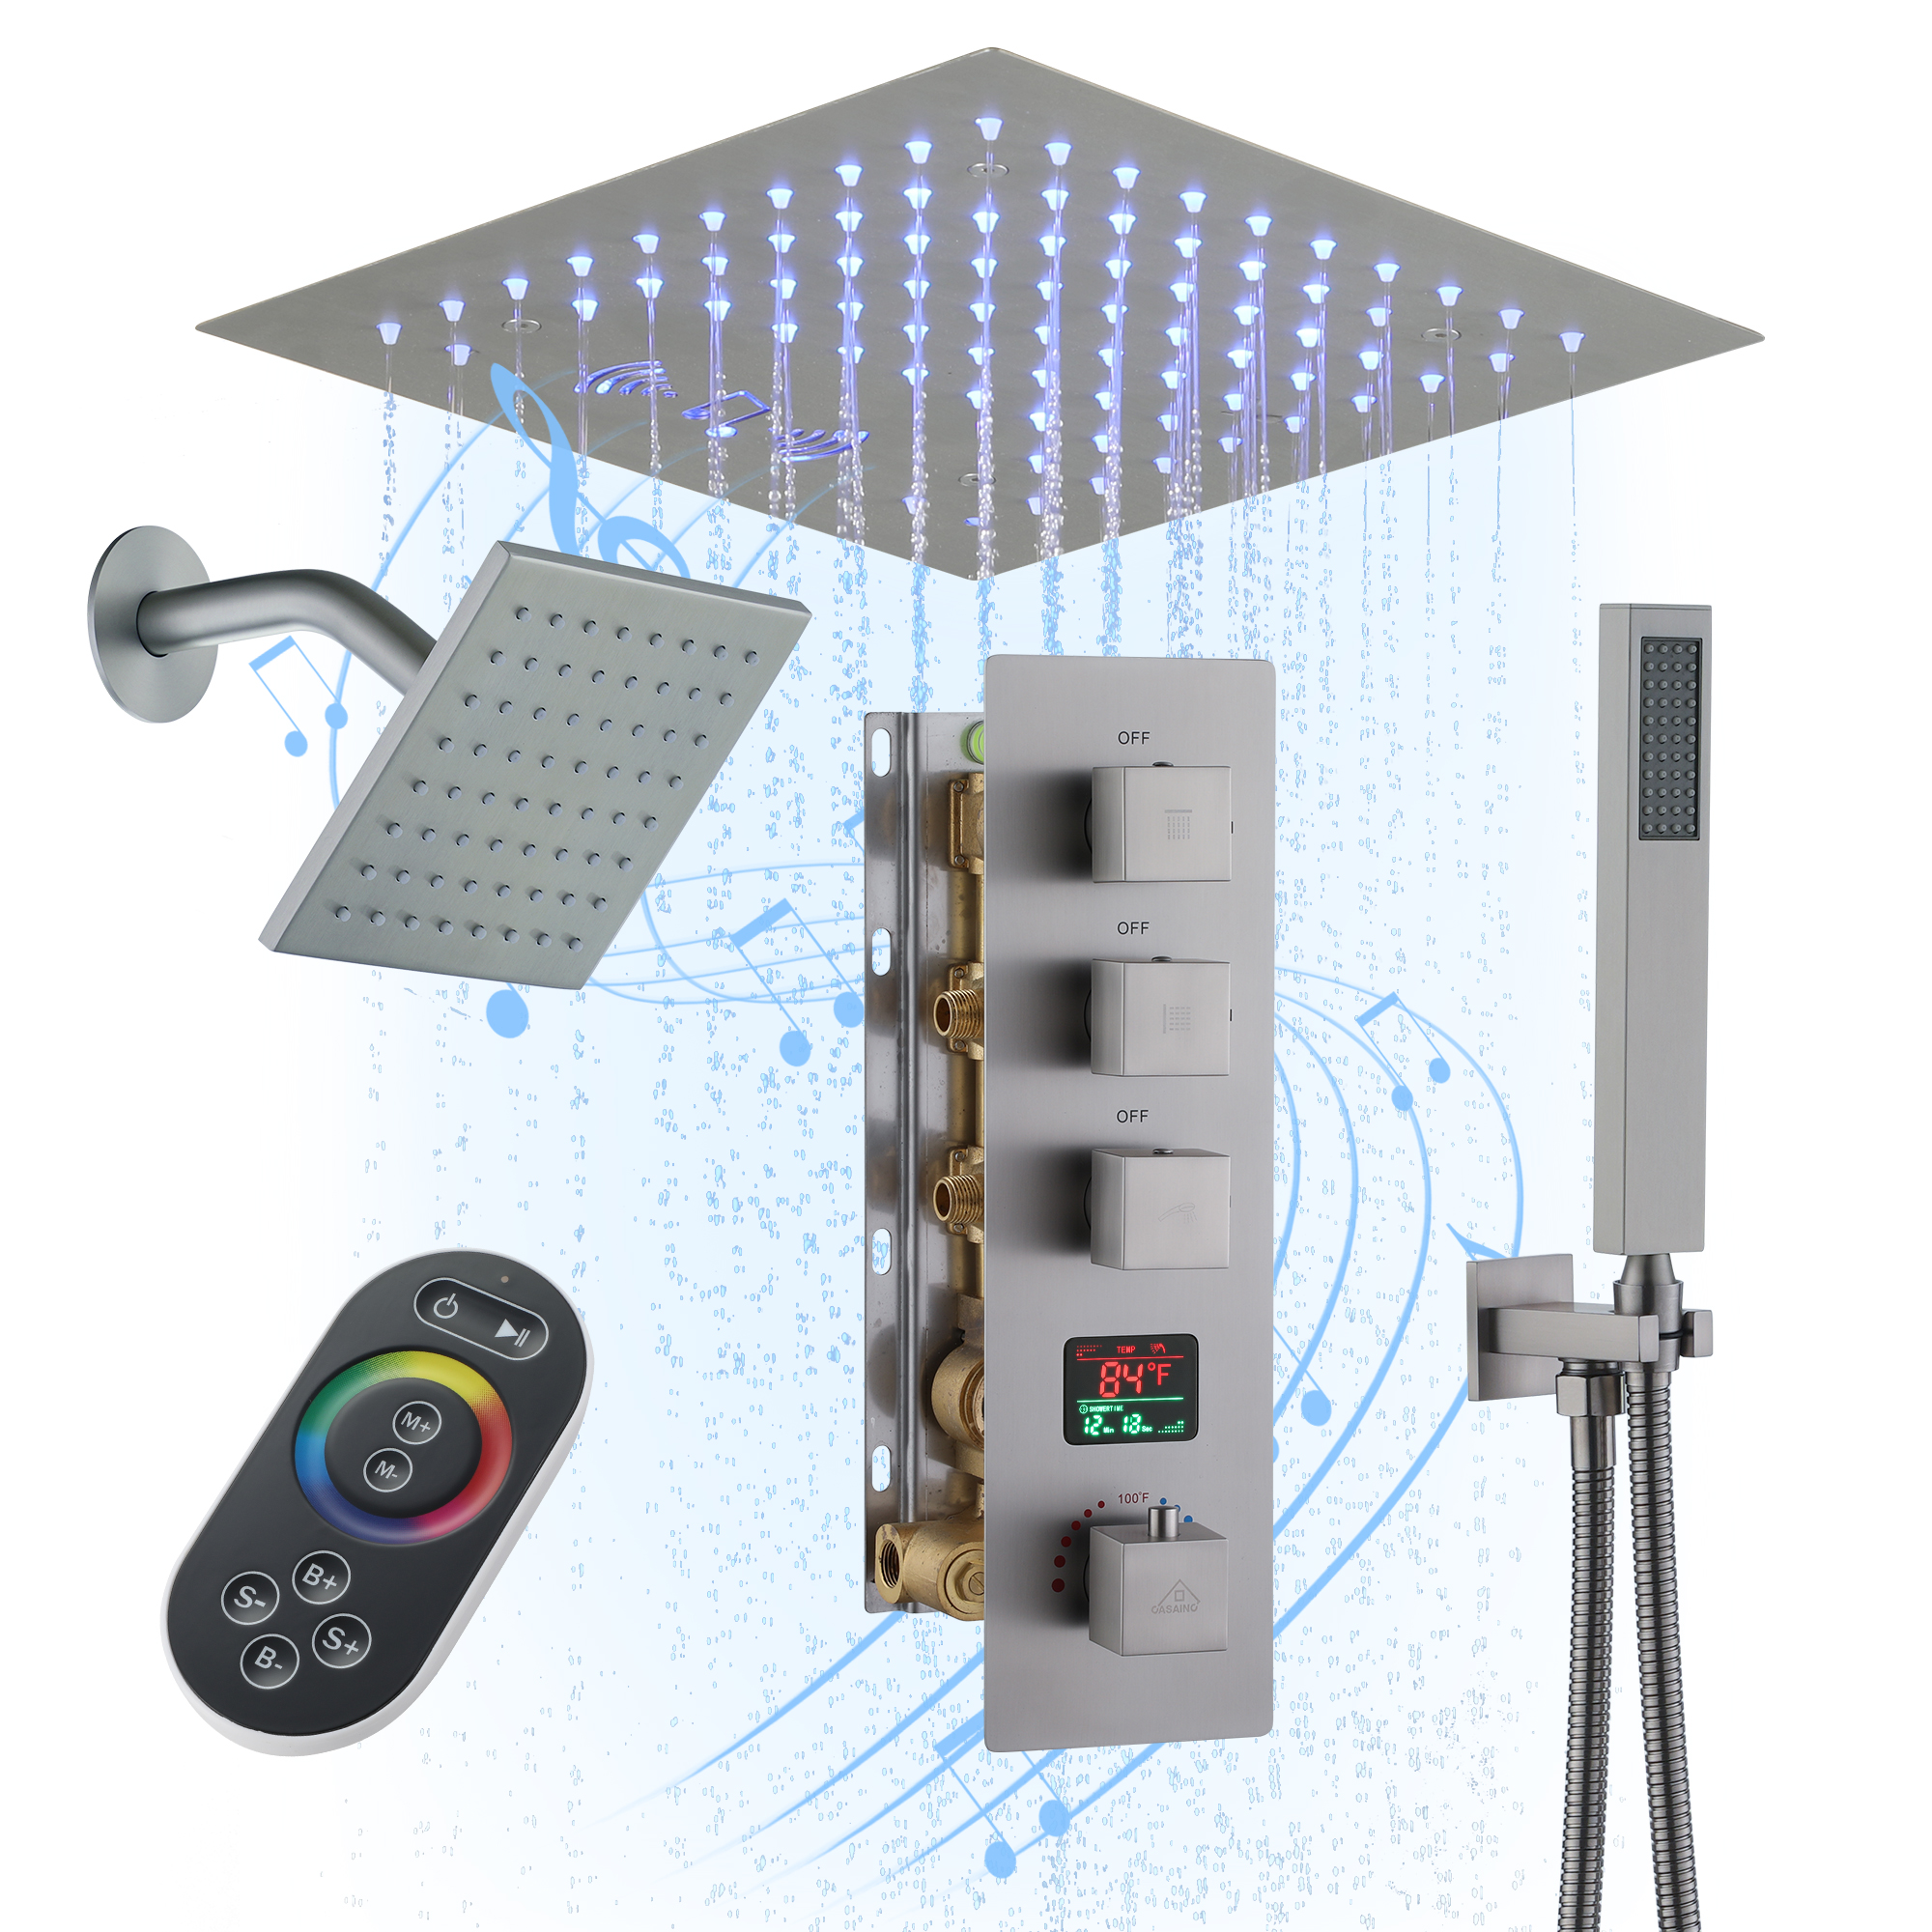 Luxurious Showerhead Shower System With 64 Colors Of Led Lighting And Bluetooth Technology